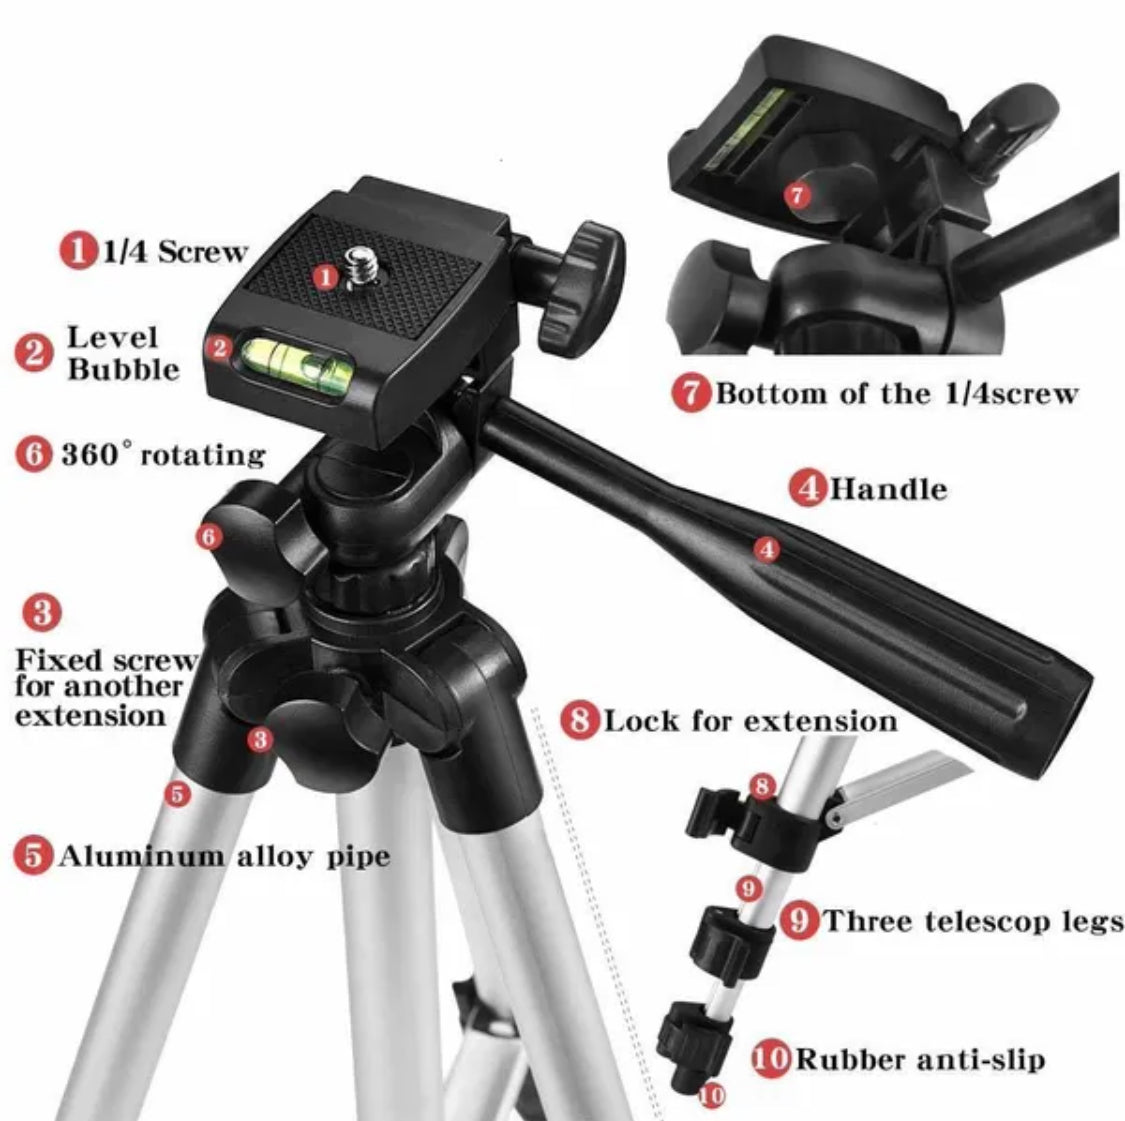 Tripod with Phone Holder Mount and Bluetooth Remote Shutter